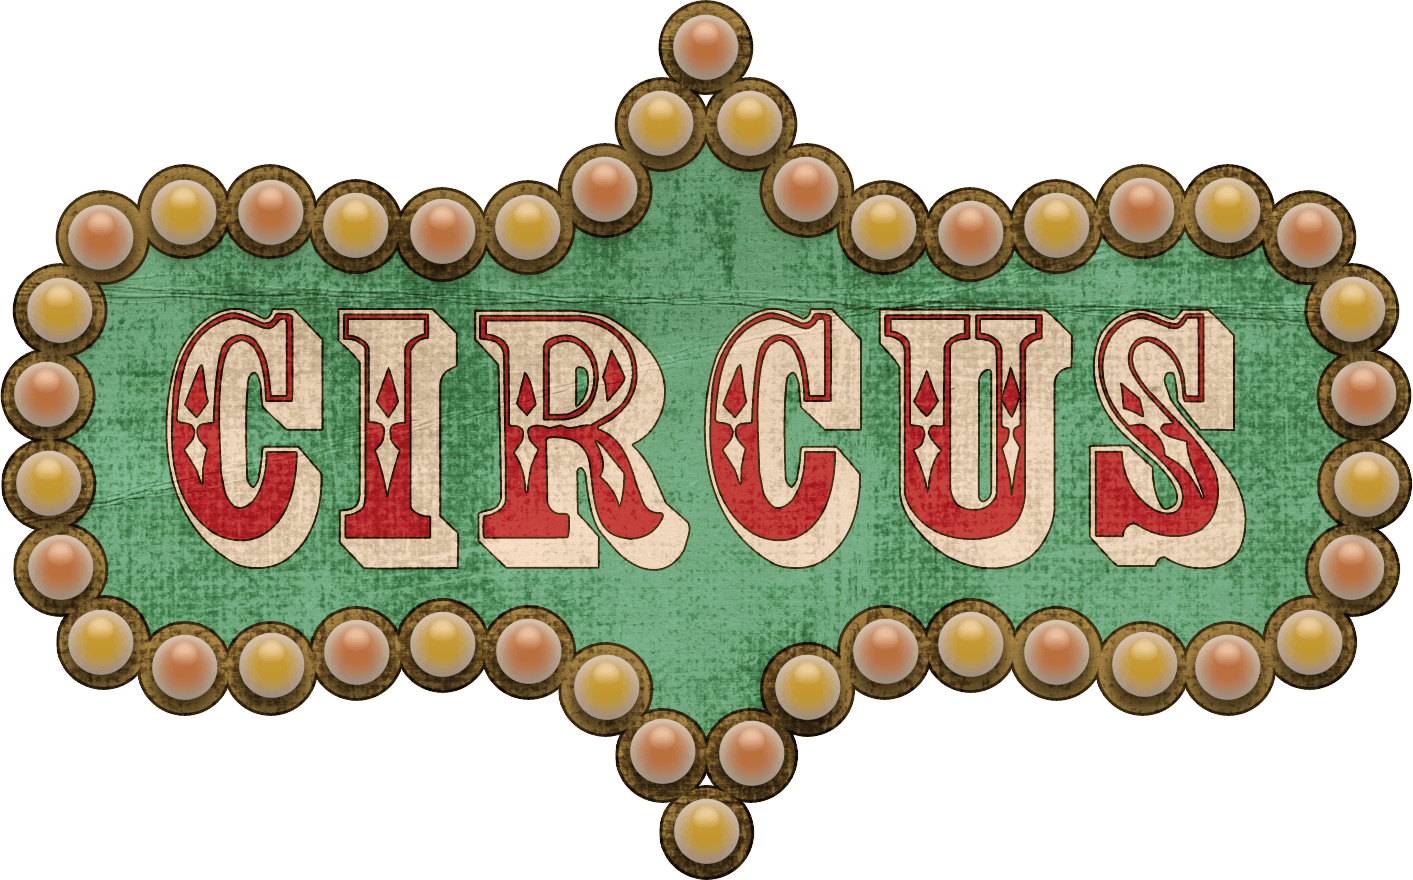 Free word cliparts download. Words clipart circus